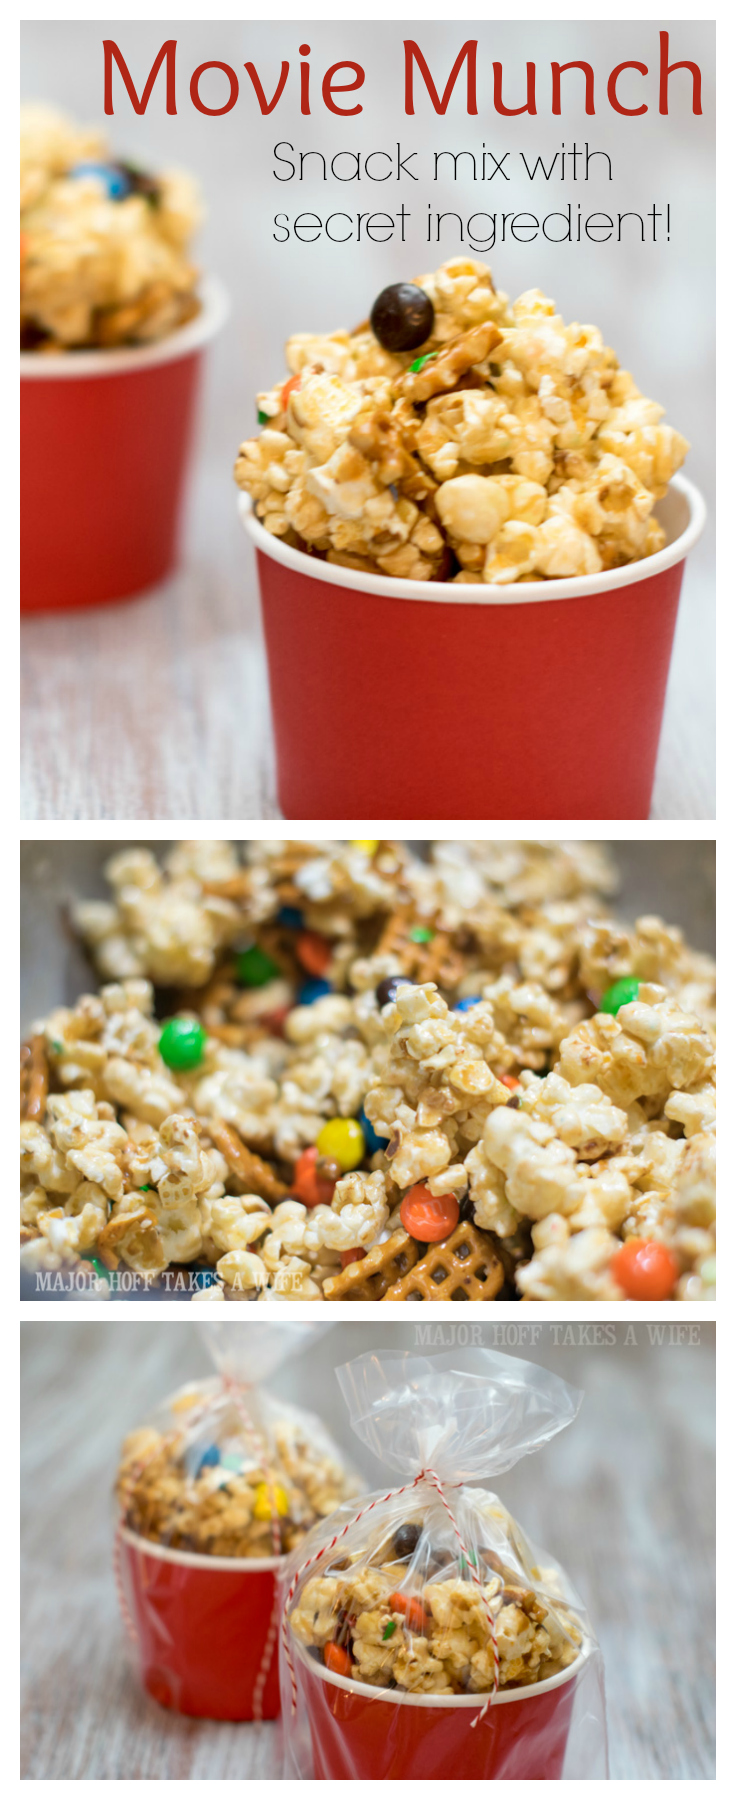 It's time for a Family Movie Night! You won't want to miss this recipe for the fabulous Movie Munch! Can you guess what the secret ingredient is? Post also shows how to create your own Guardians of the Galaxy Gift Basket, perfect for your favorite super hero fans, or for a Finals Survival kit. #OwnTheGalaxy #CBias #sp #ad